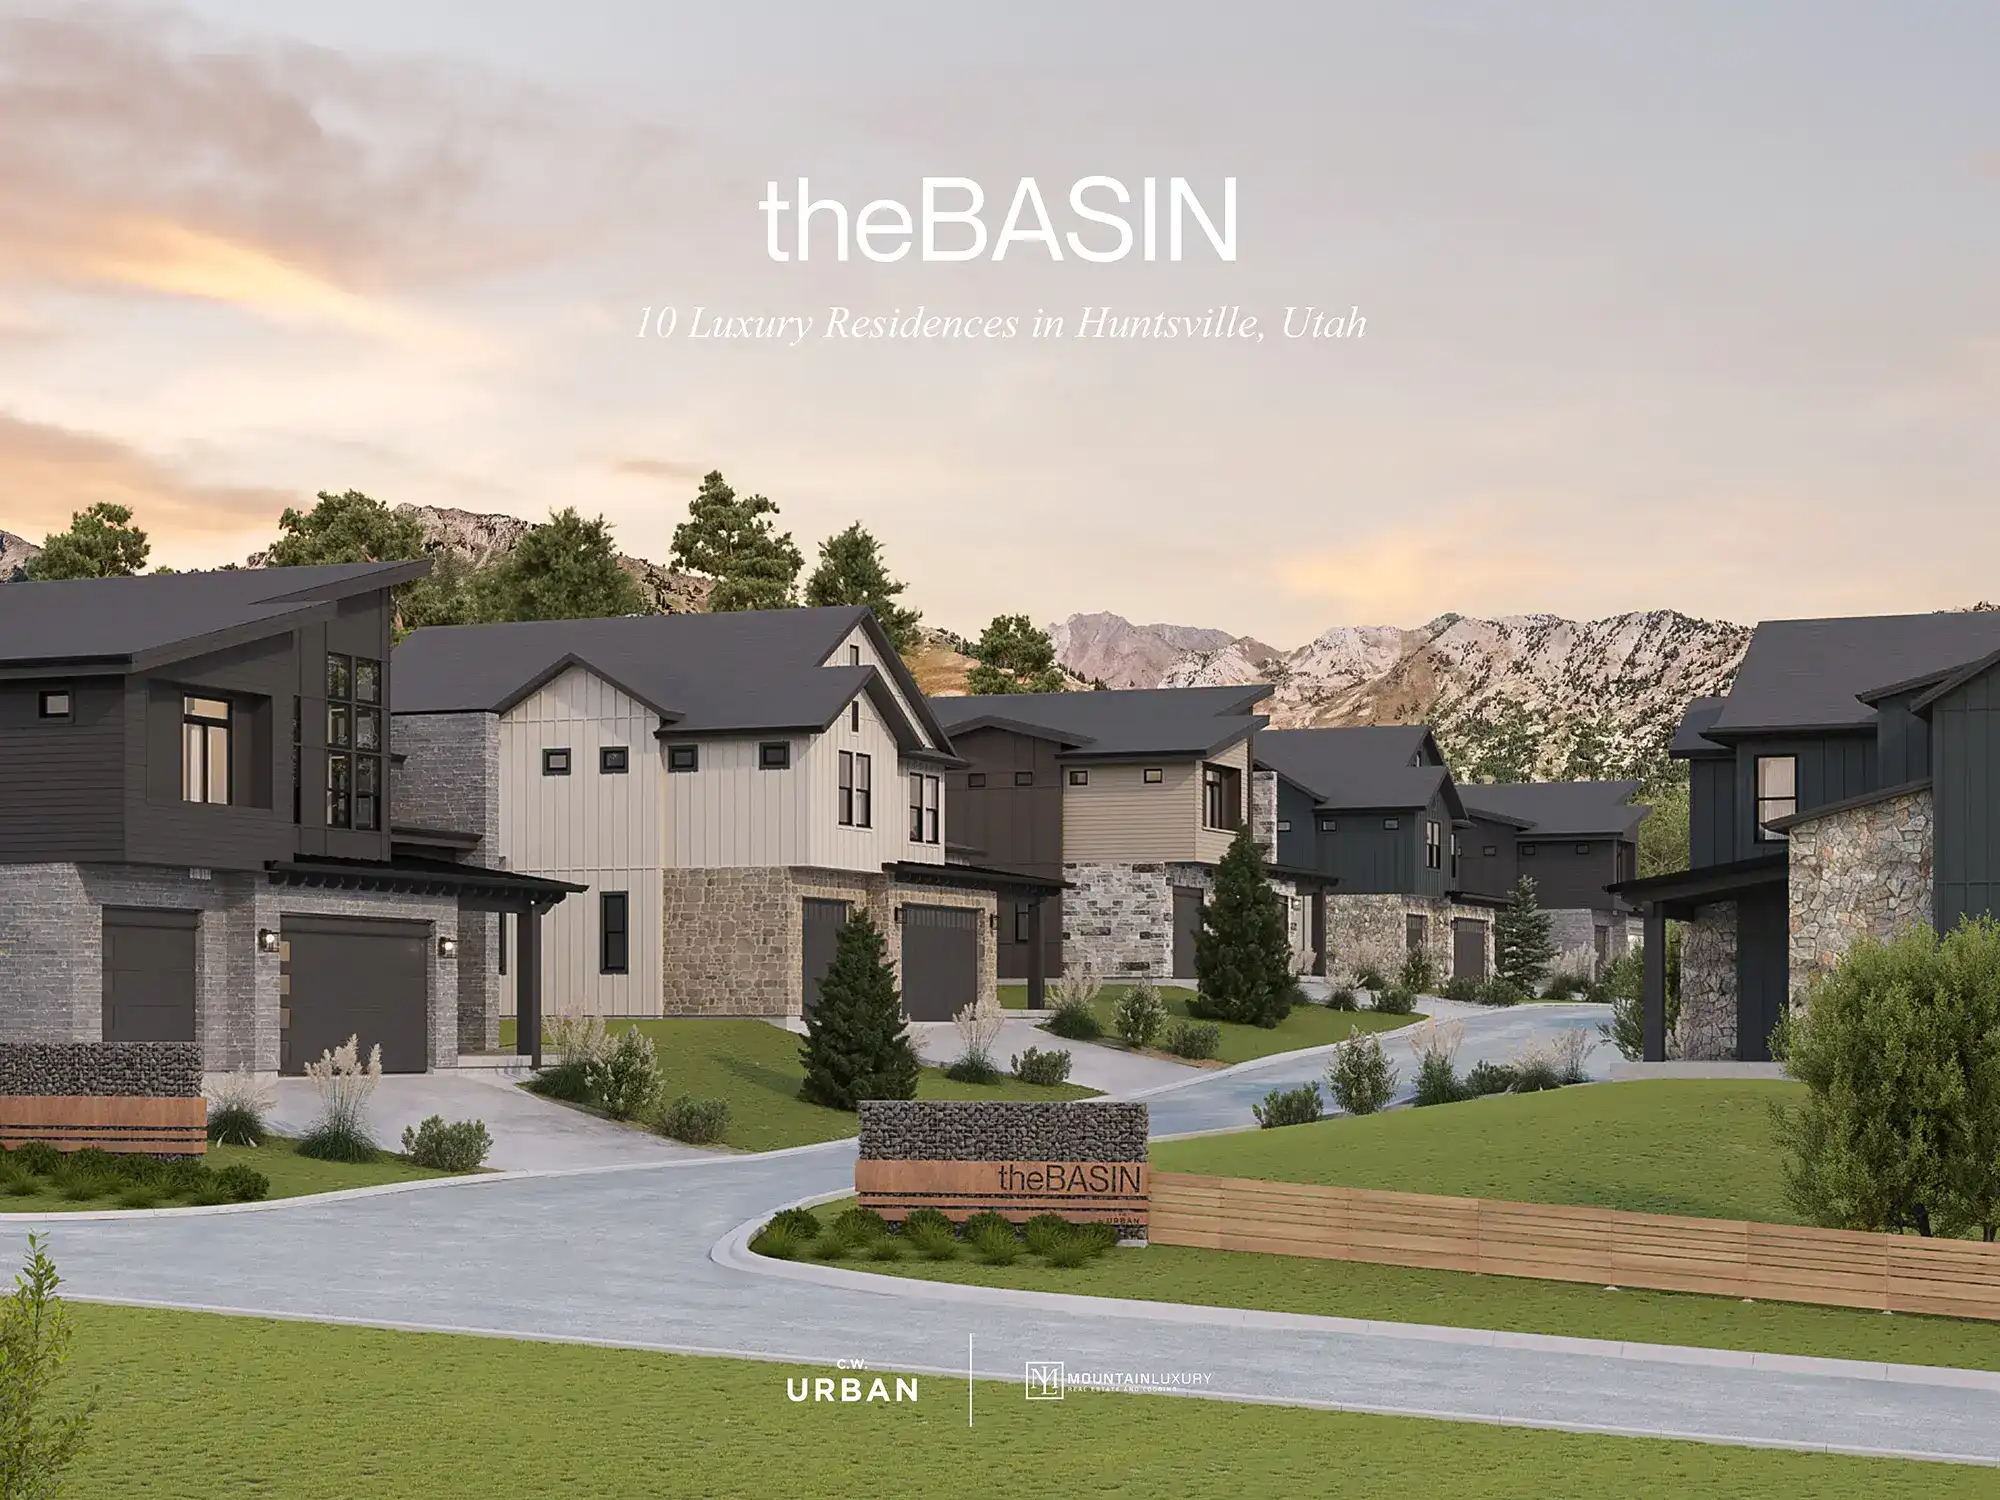 Photo realistic rendering of theBasin subdivision.